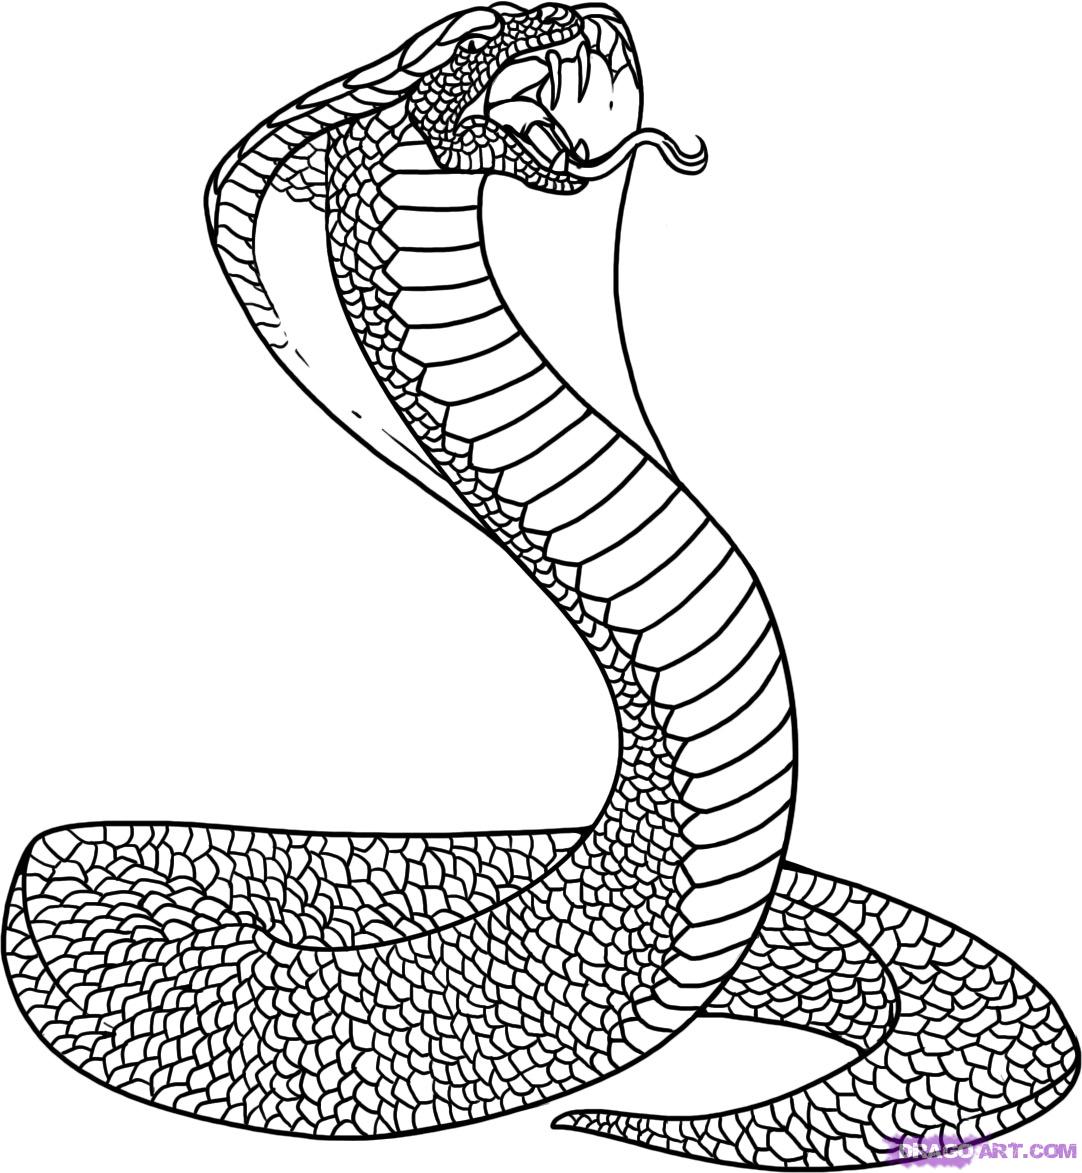 How To Draw A Snake, King Cobra, Step by Step, Snakes, Animals 